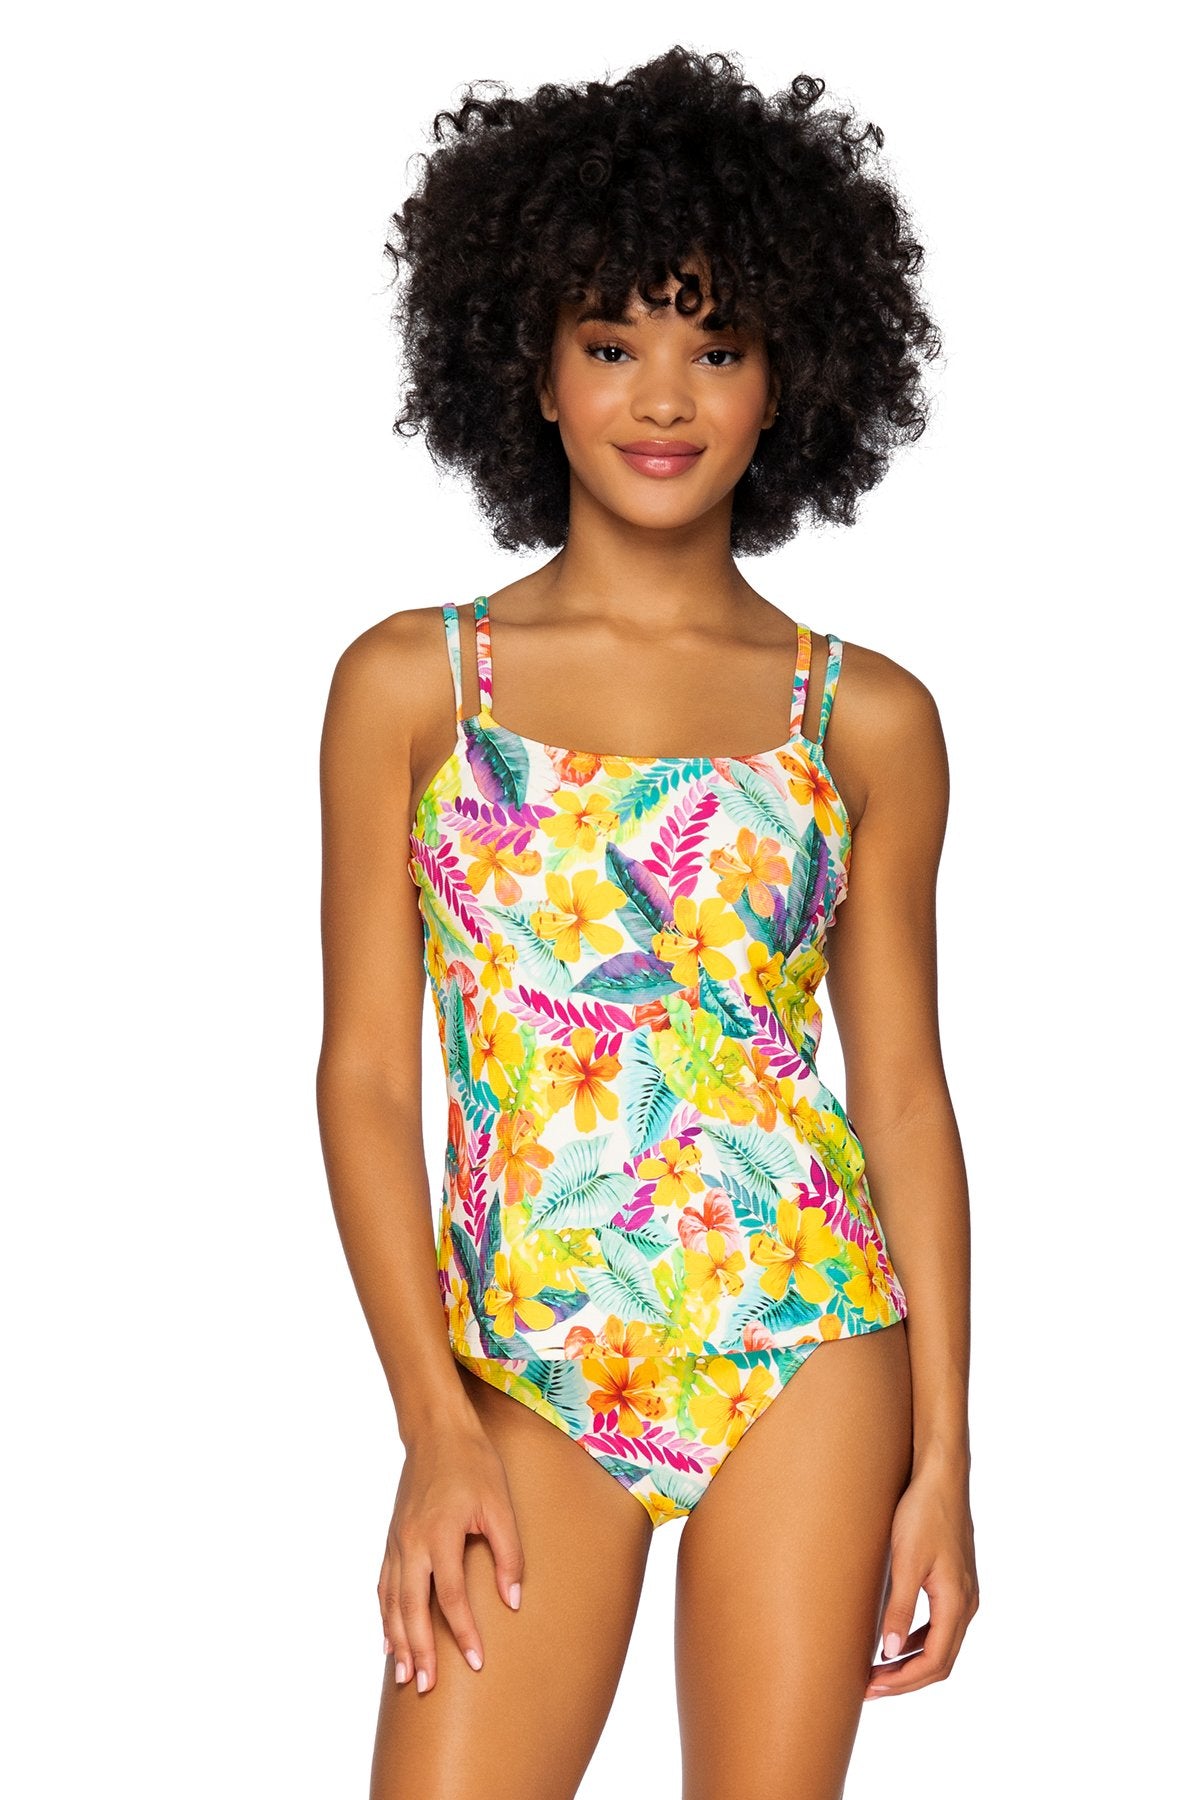 Taylor Tankini D-DD Sizes by Sunsets - WalterGreenBoutique